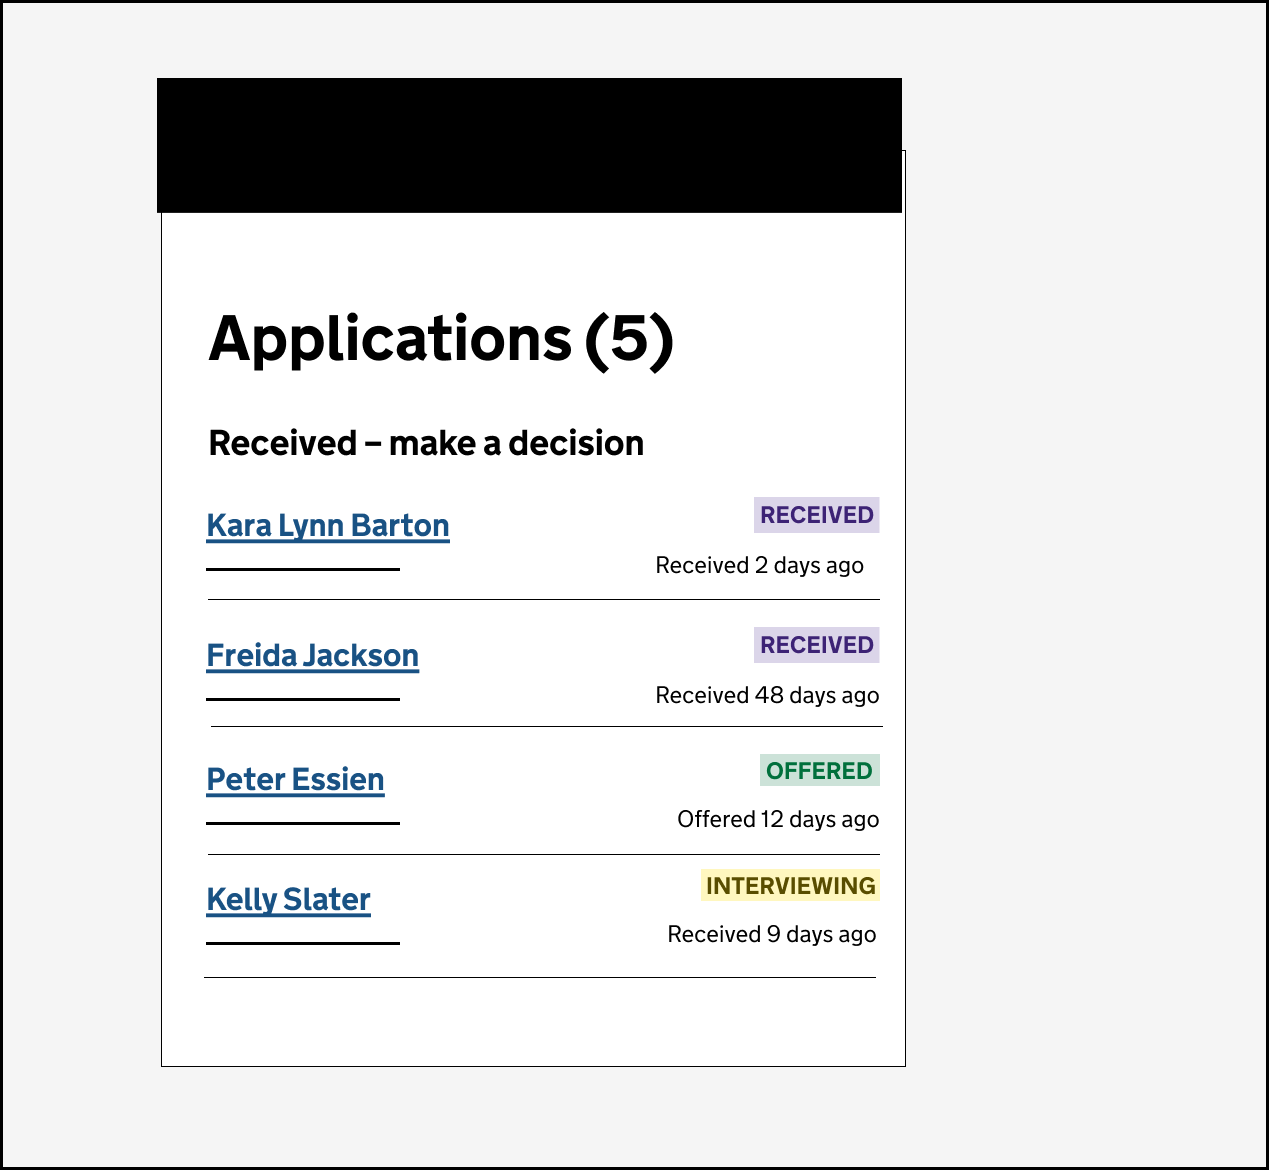 Illustration showing a list of applications with the header 'Received – make a decision'. There are 5 applications in the list with each one showing the name of the candidate, the status each application is in, and how long ago the application was received.